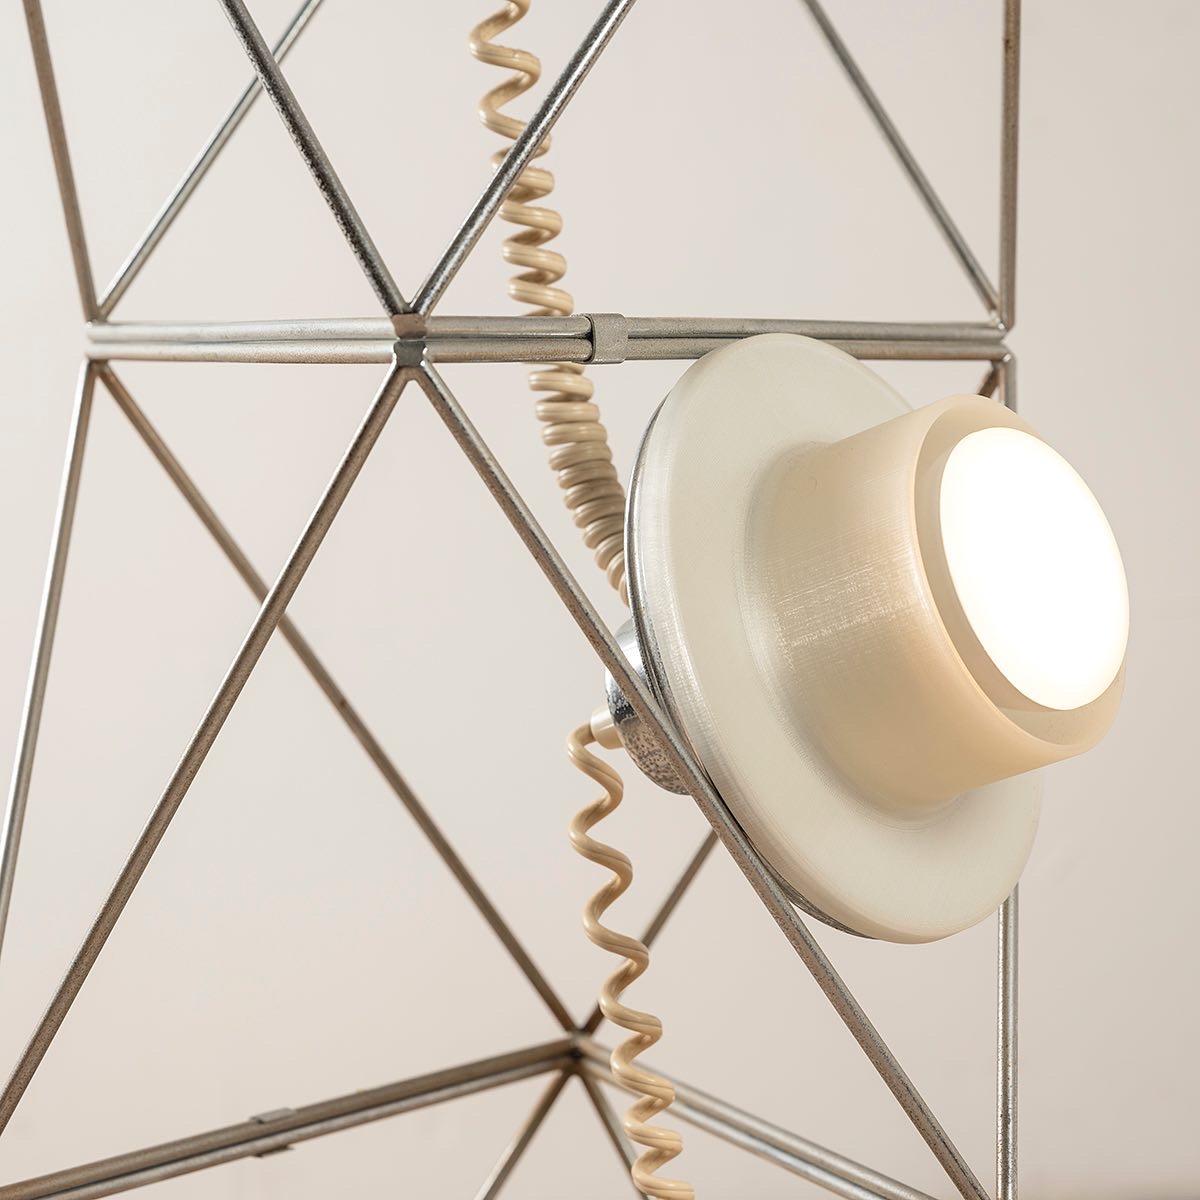 Polyèdre modular lamp, created by Felice Ragazzo, Harvey Guzzini 1969 edition. Structure in chromed brass wires. This floor lamp is composed of several modules assembled by staples. Several shapes possible. The model presented is made up of 4